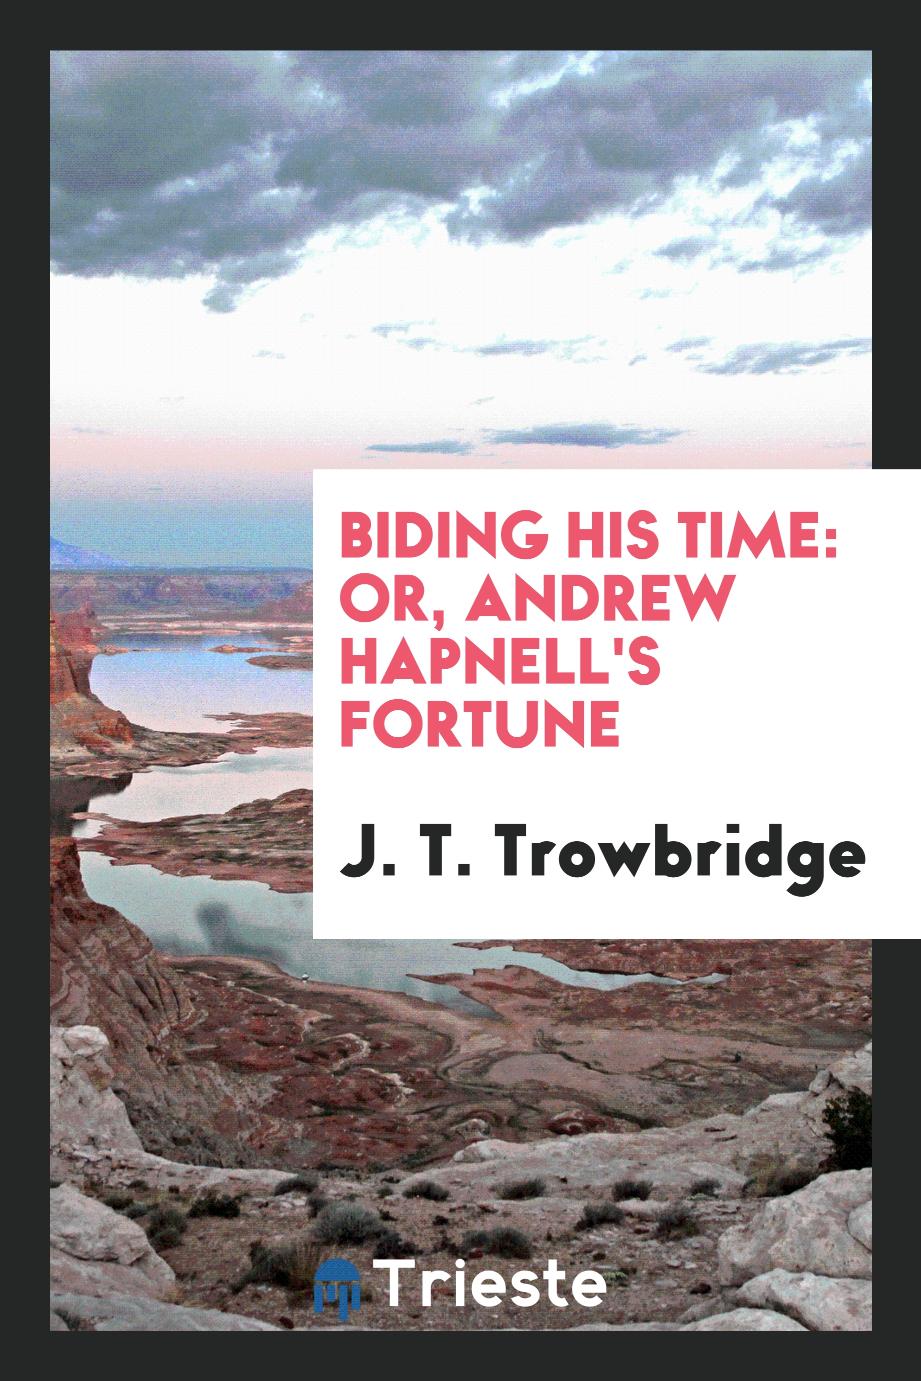 Biding His Time: Or, Andrew Hapnell's Fortune